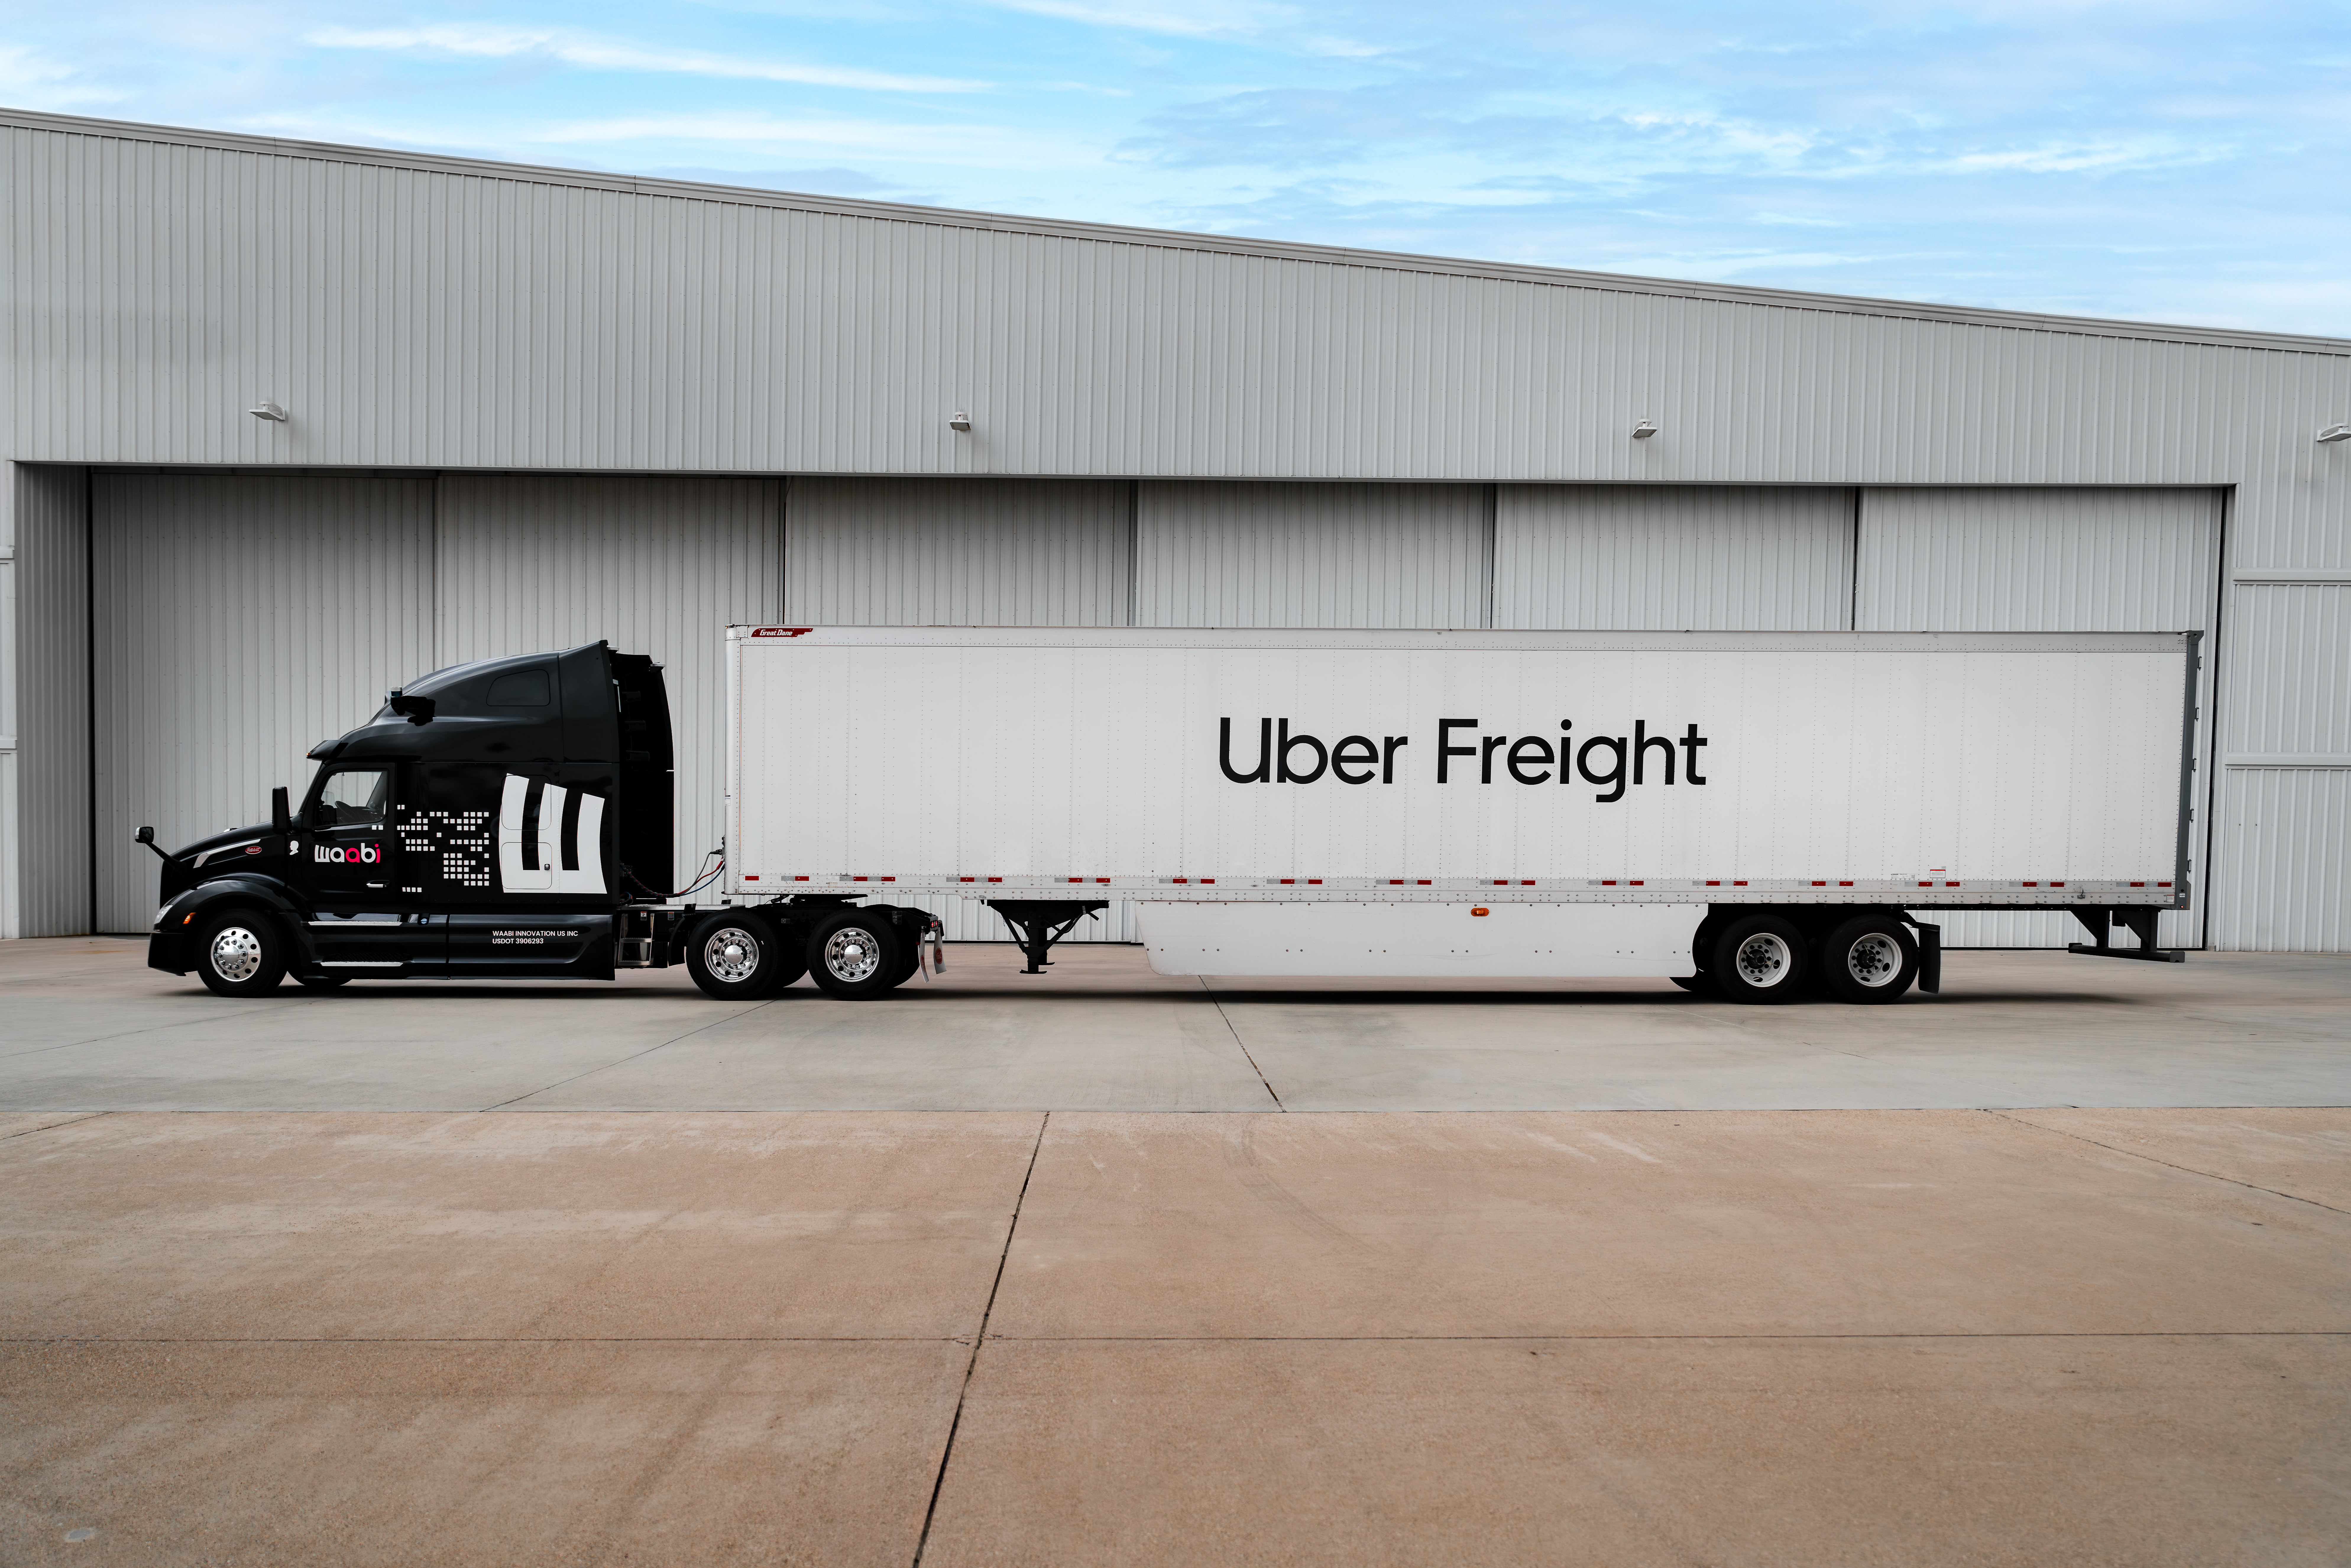 A Waabi self driving truck pulling an Uber Freight trailer. Photo by Debora Conn